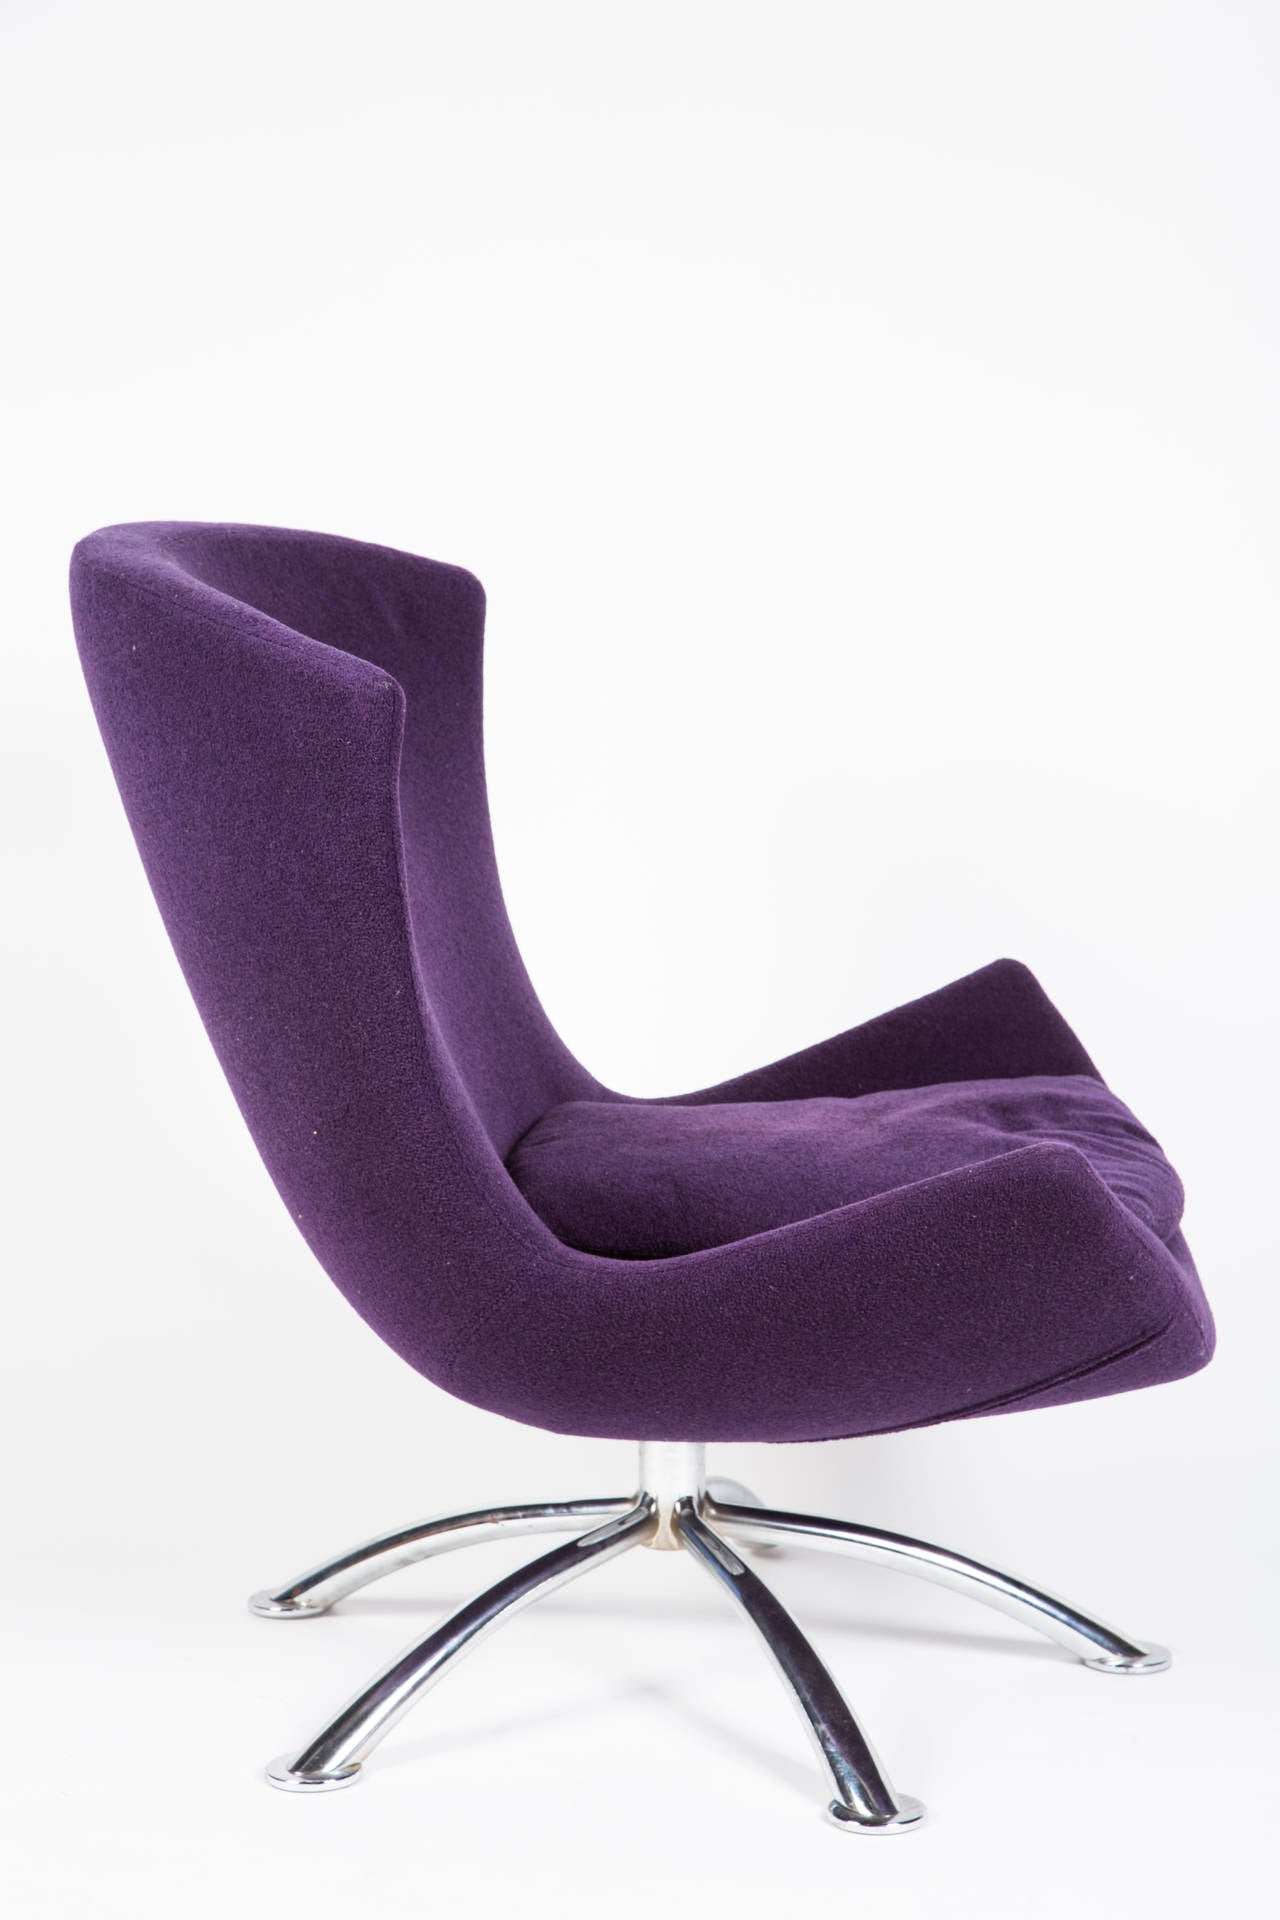 Saarinen style swivel chair and ottoman by Knoll. Original upholstery in wool.
Matching ottoman 19 x 19 x 14 H.